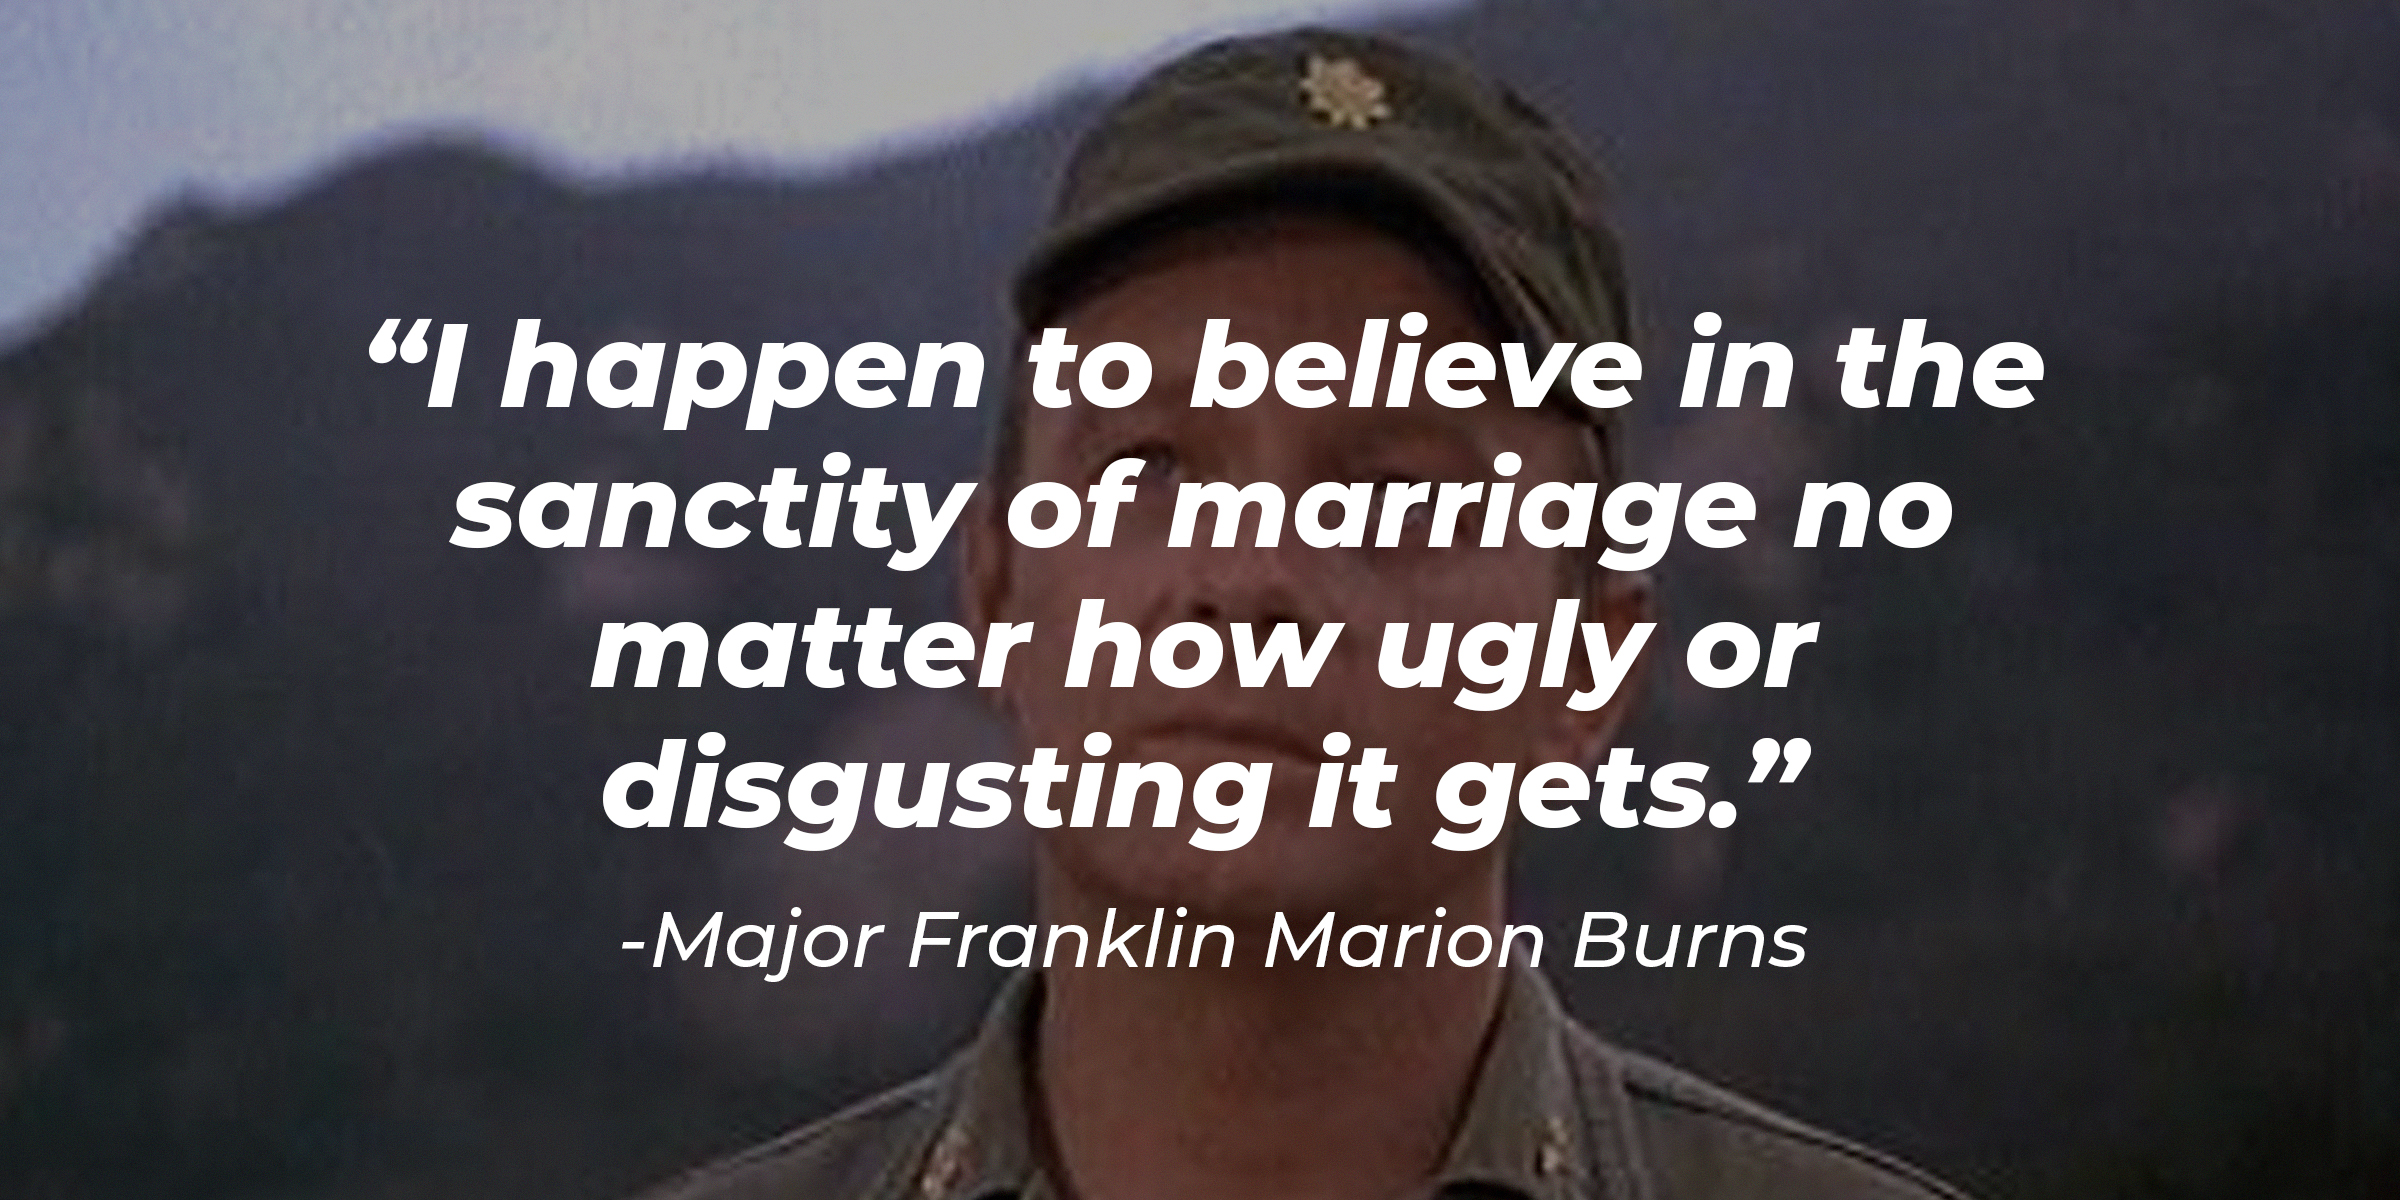 Major Franklin Marion Burns, with his quote: “I happen to believe in the sanctity of marriage no matter how ugly or disgusting it gets.” | Source: Facebook.com/MASHonTVLand